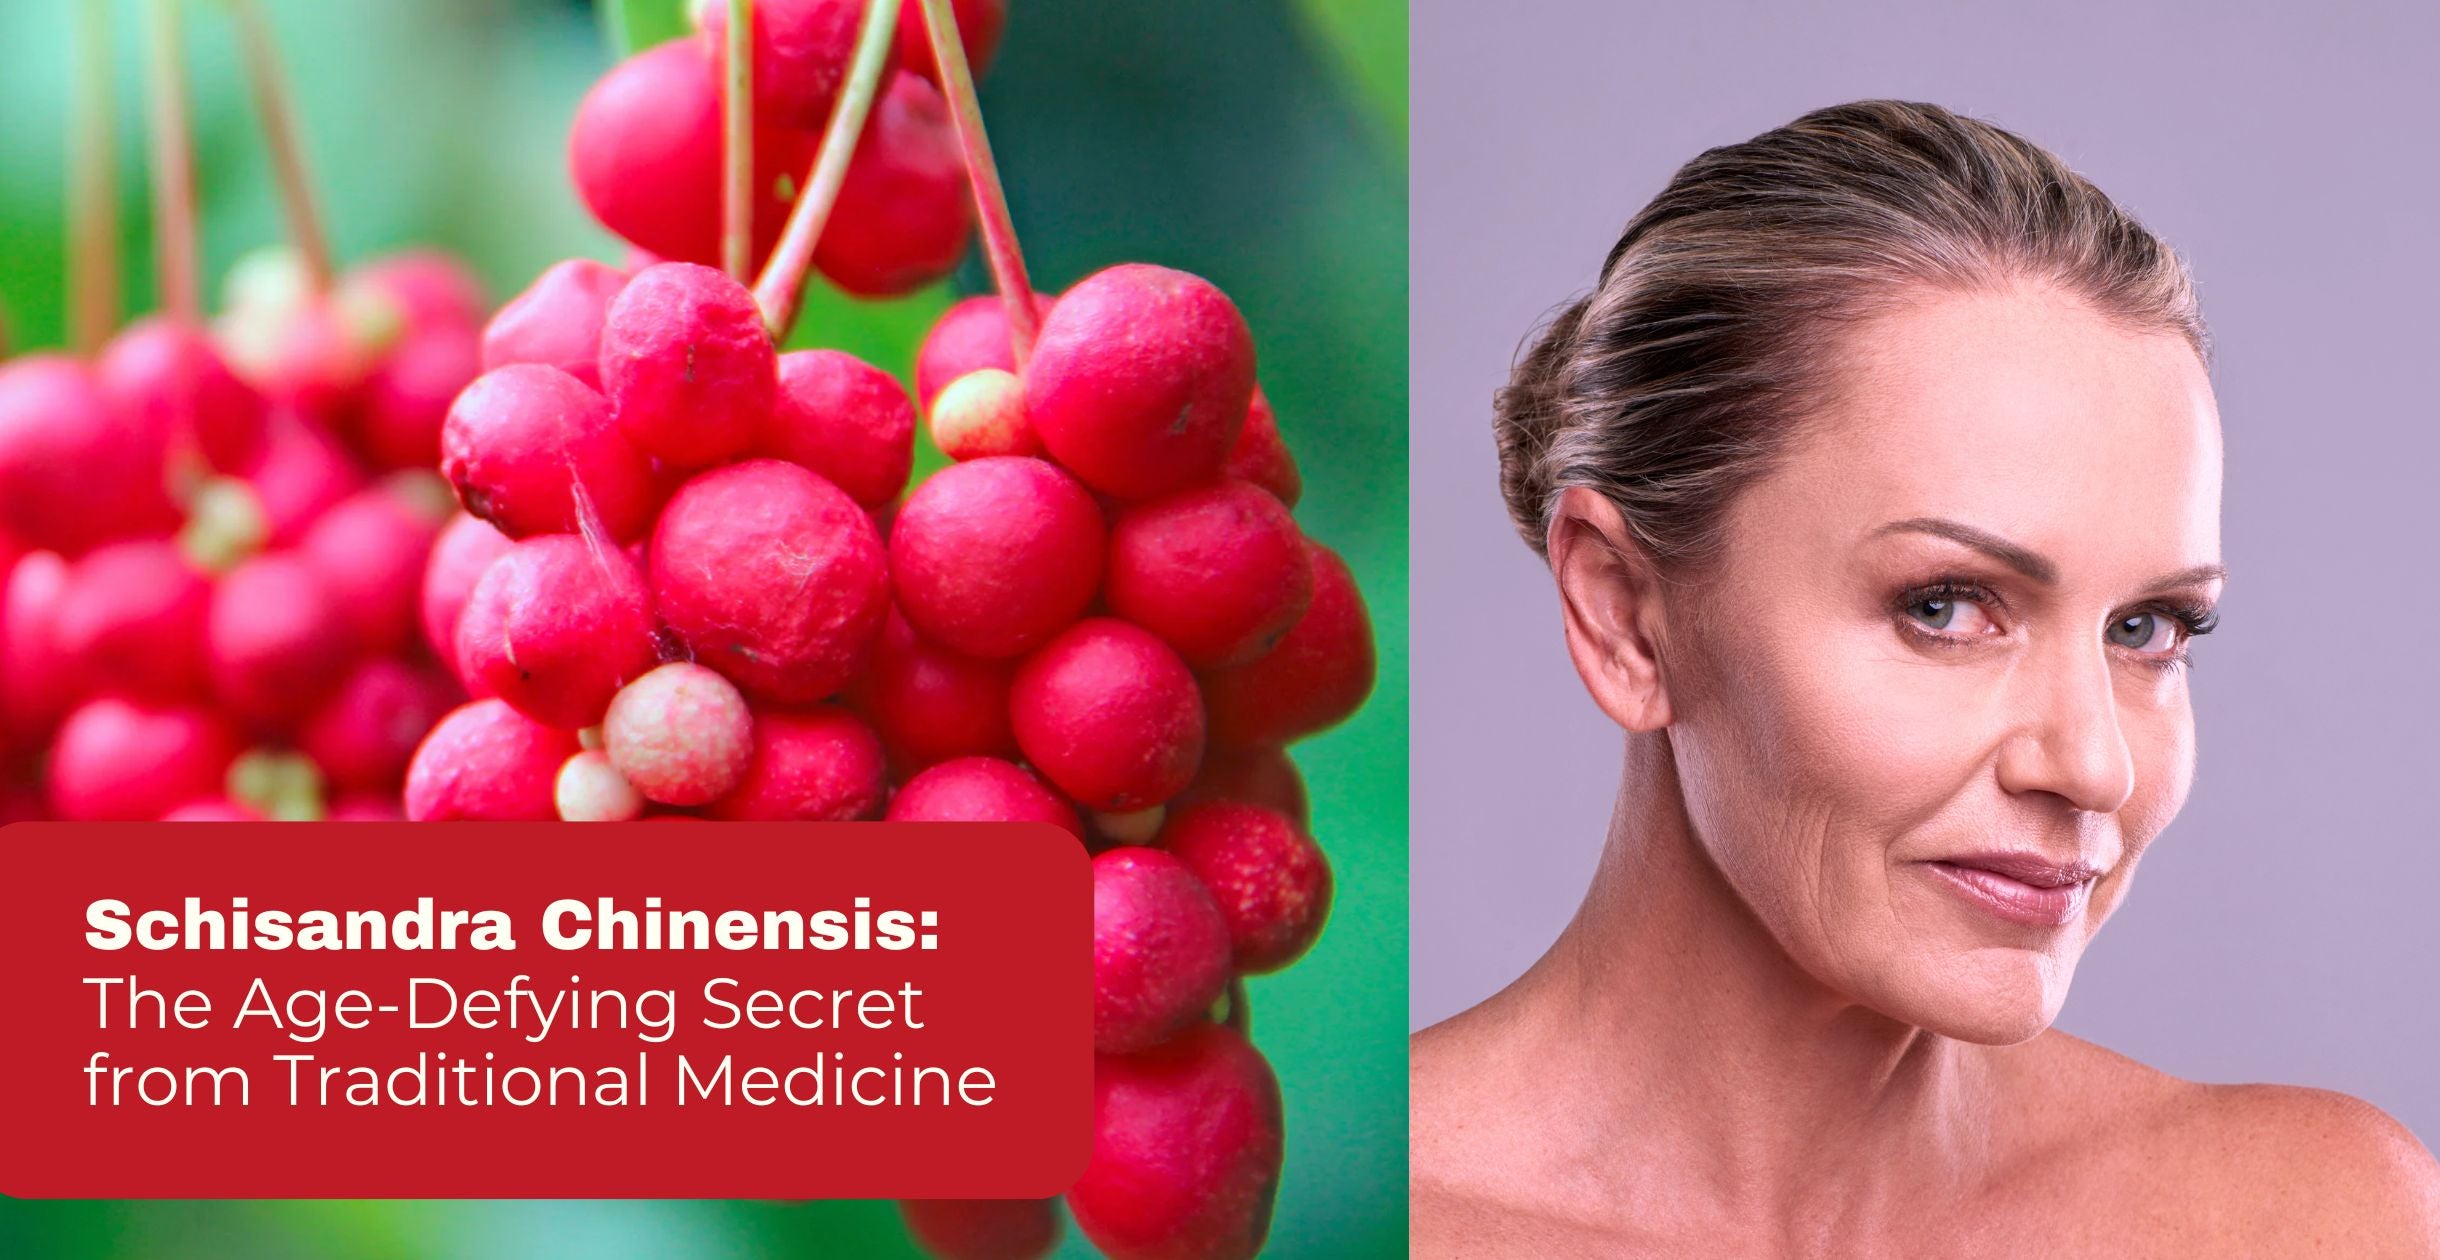 Schisandra Chinensis: The Age-Defying Secret from Traditional Medicine